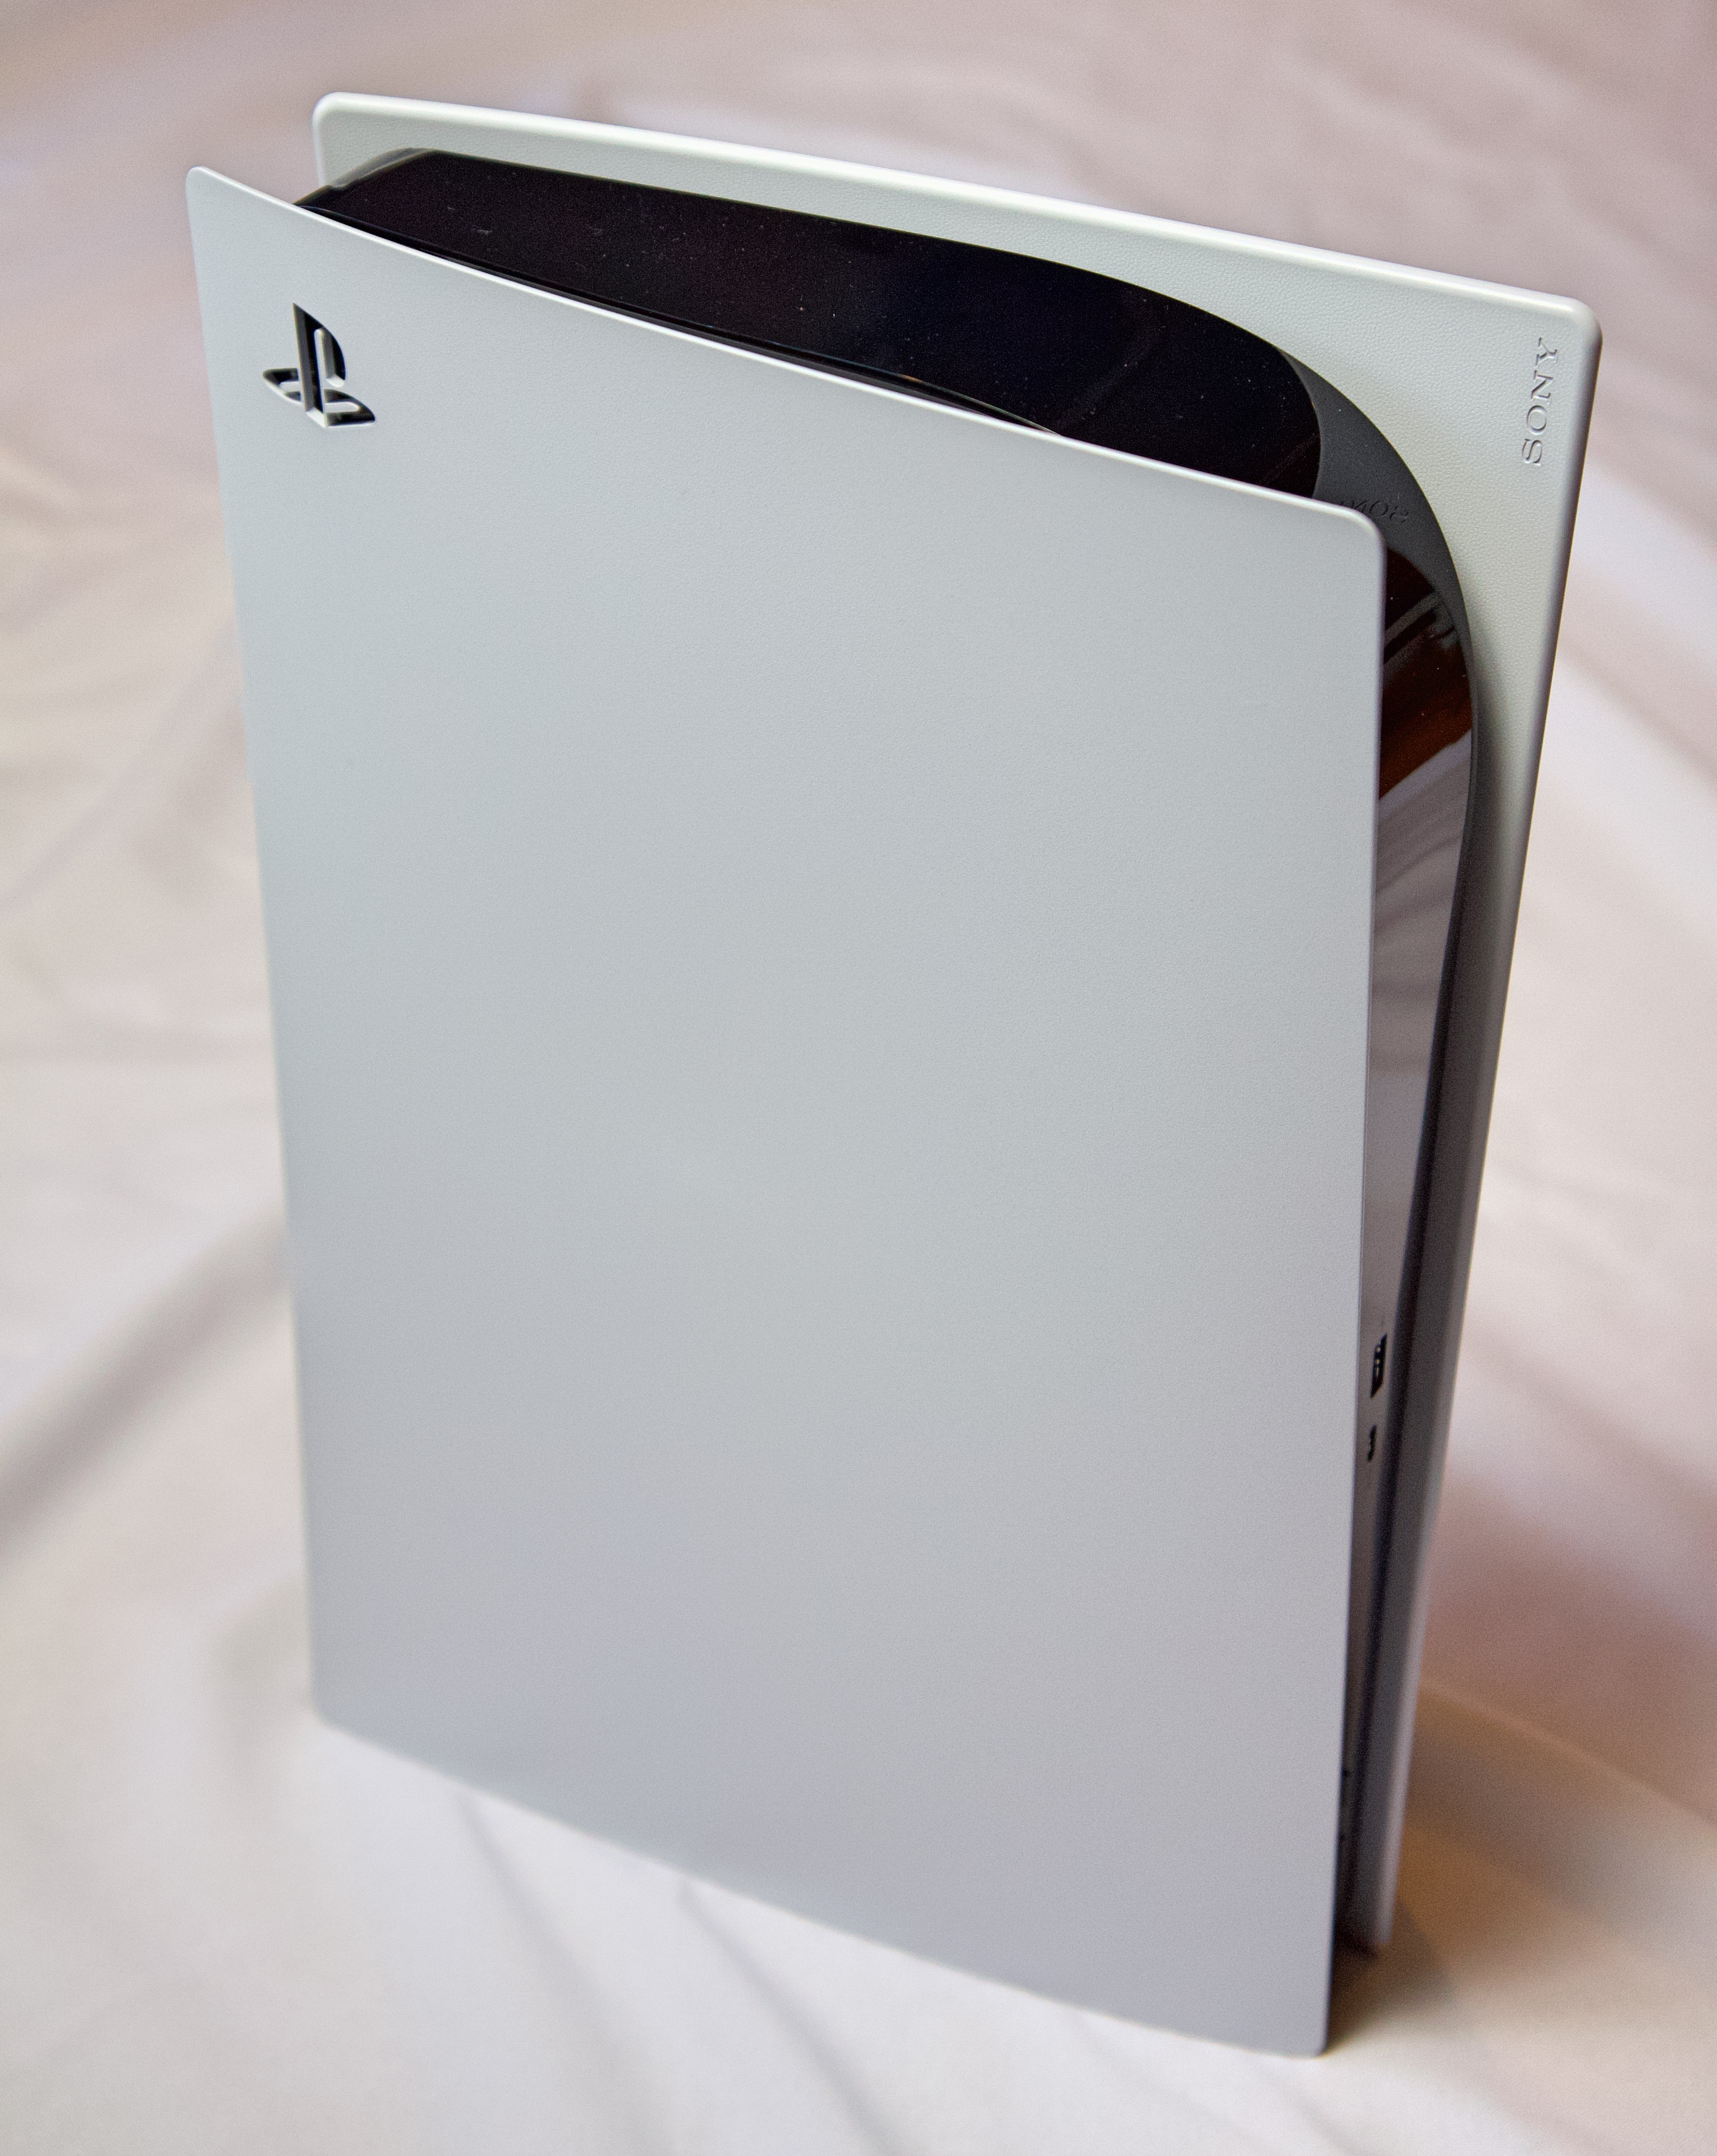 The PS5 Slim Unboxing - New PlayStation 5 Console! (Disc and